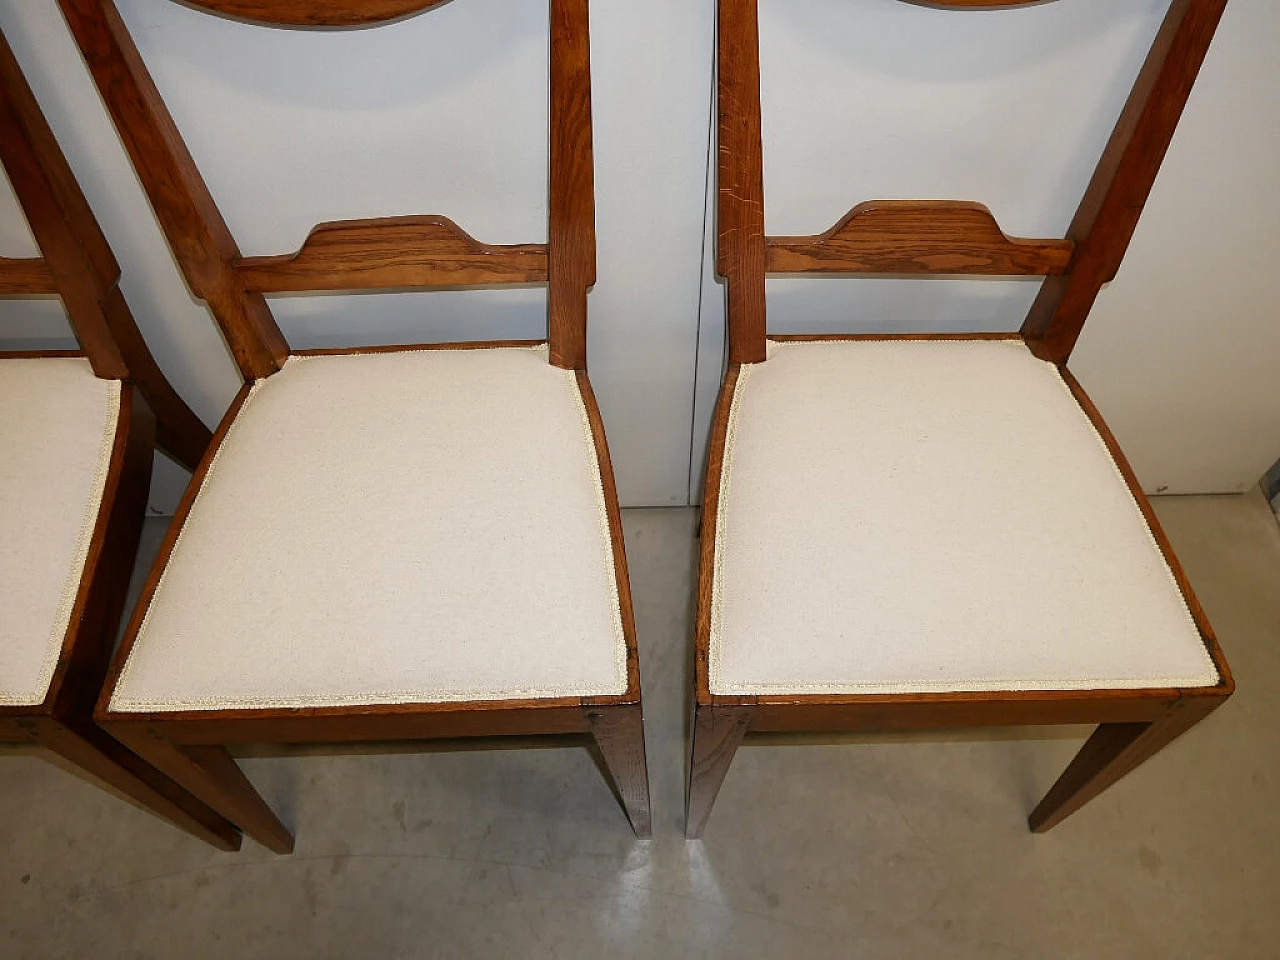 4 Solid oak chairs with fabric seat, mid-19th century 5